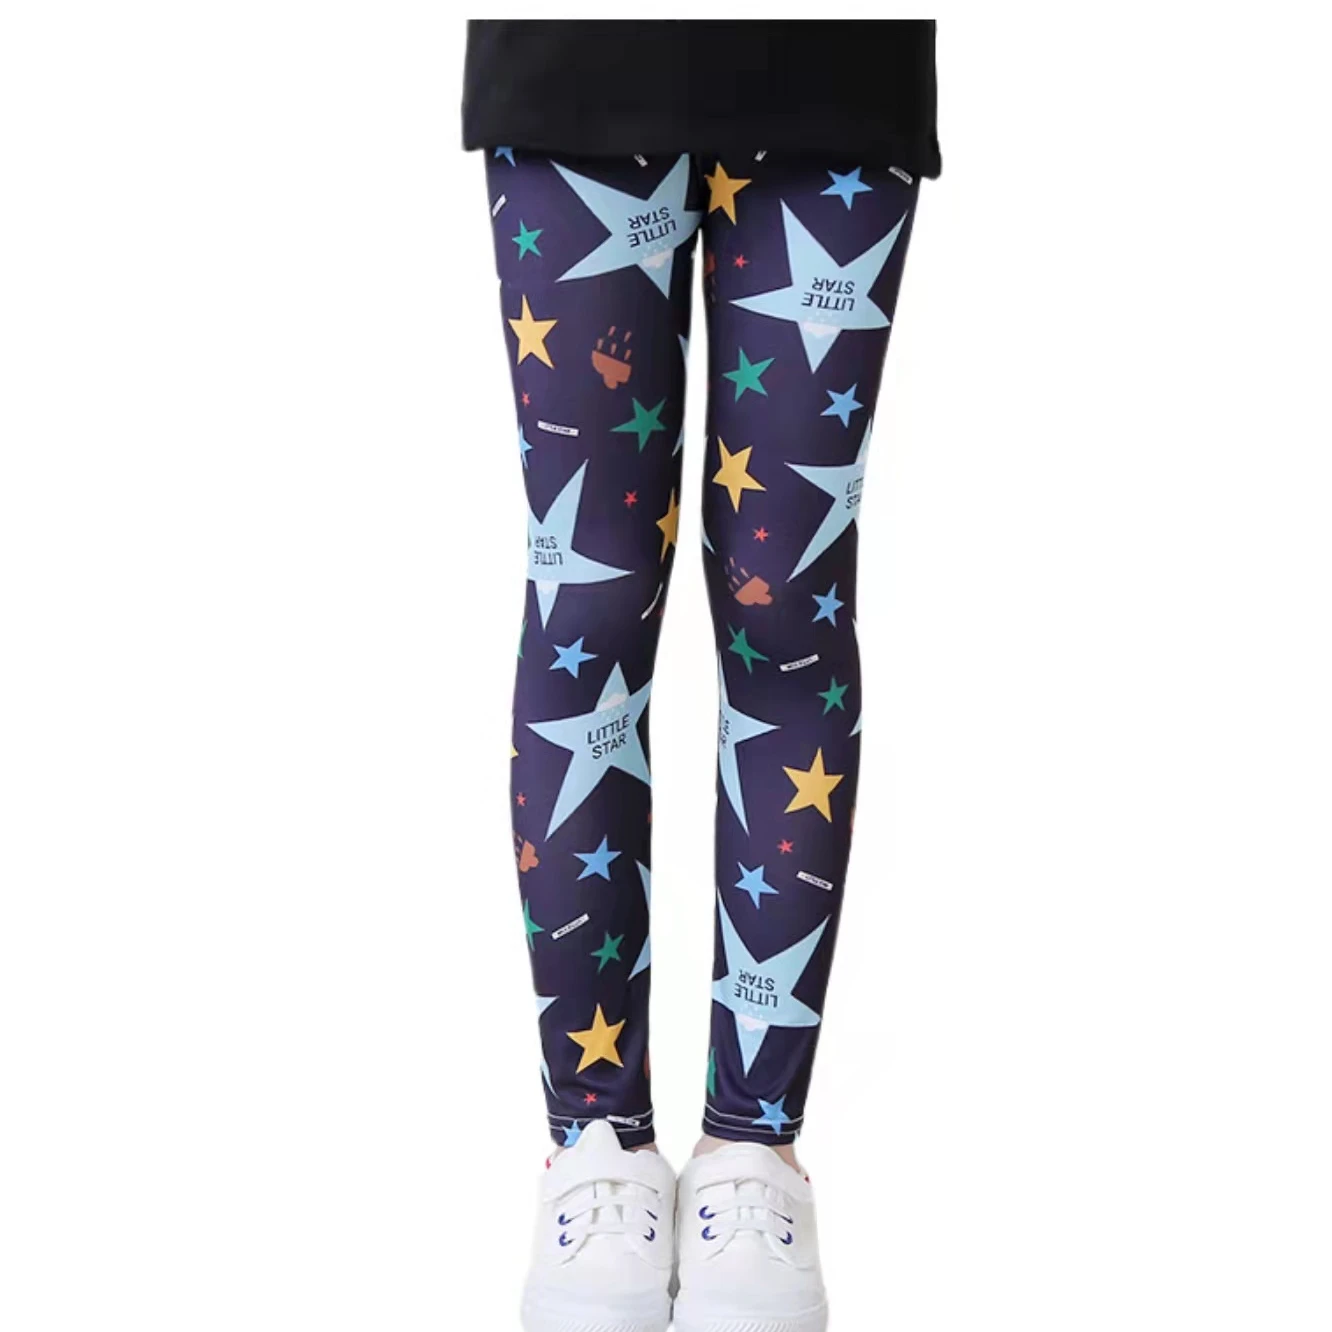 Kids Cave - Black Cotton Blend Girls Leggings ( Pack of 2 ) - Buy Kids Cave  - Black Cotton Blend Girls Leggings ( Pack of 2 ) Online at Low Price -  Snapdeal